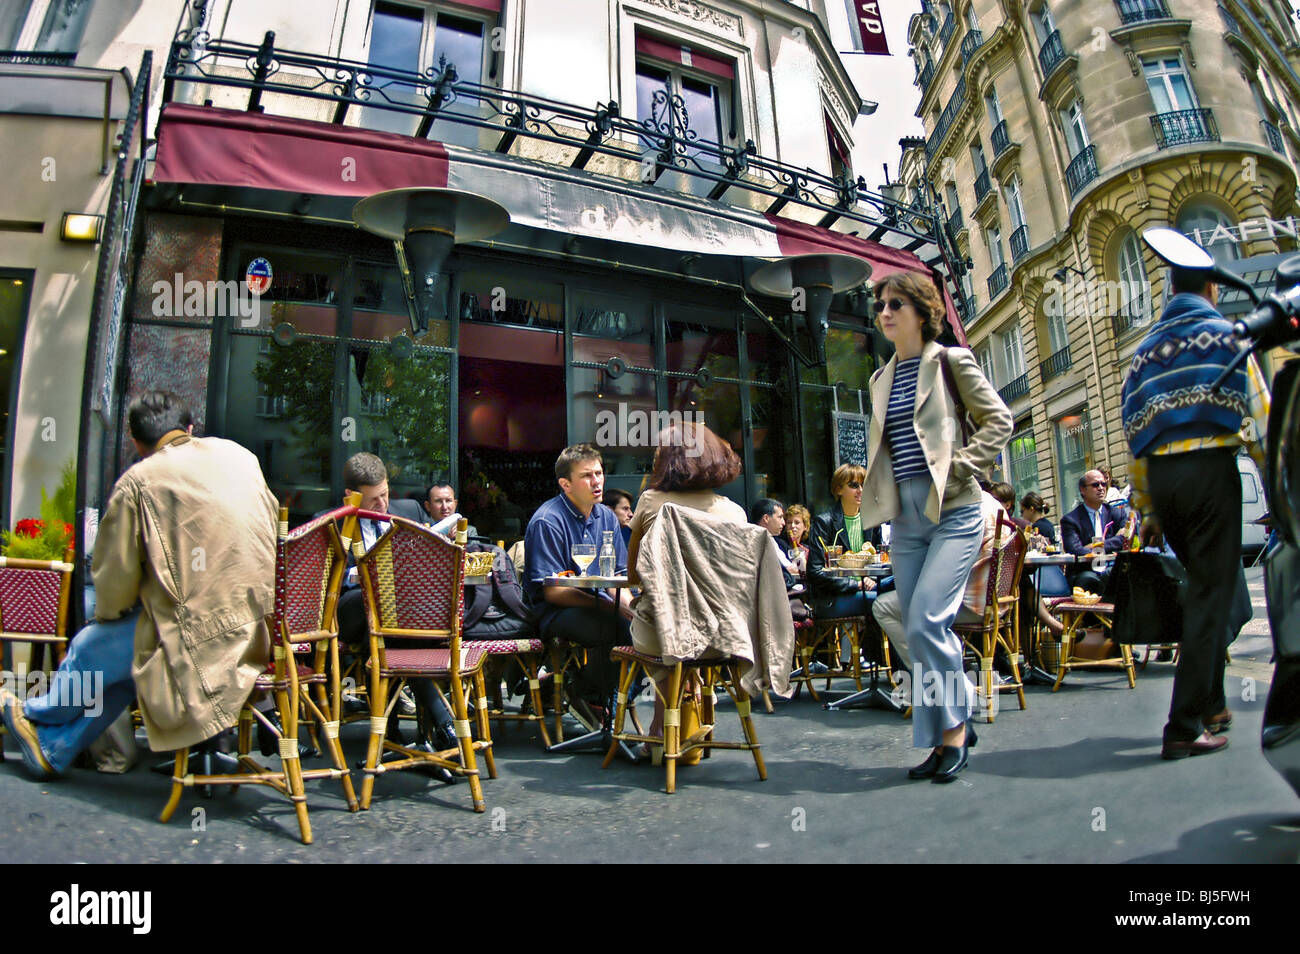 PARIS, France - Crowd of people Sharing Meals at Trendy French Café Bistro Restaurant 'Le Dada', Outside Sidewalk Terrace, group drinking coffee bar, sidewalk, woman Stock Photo